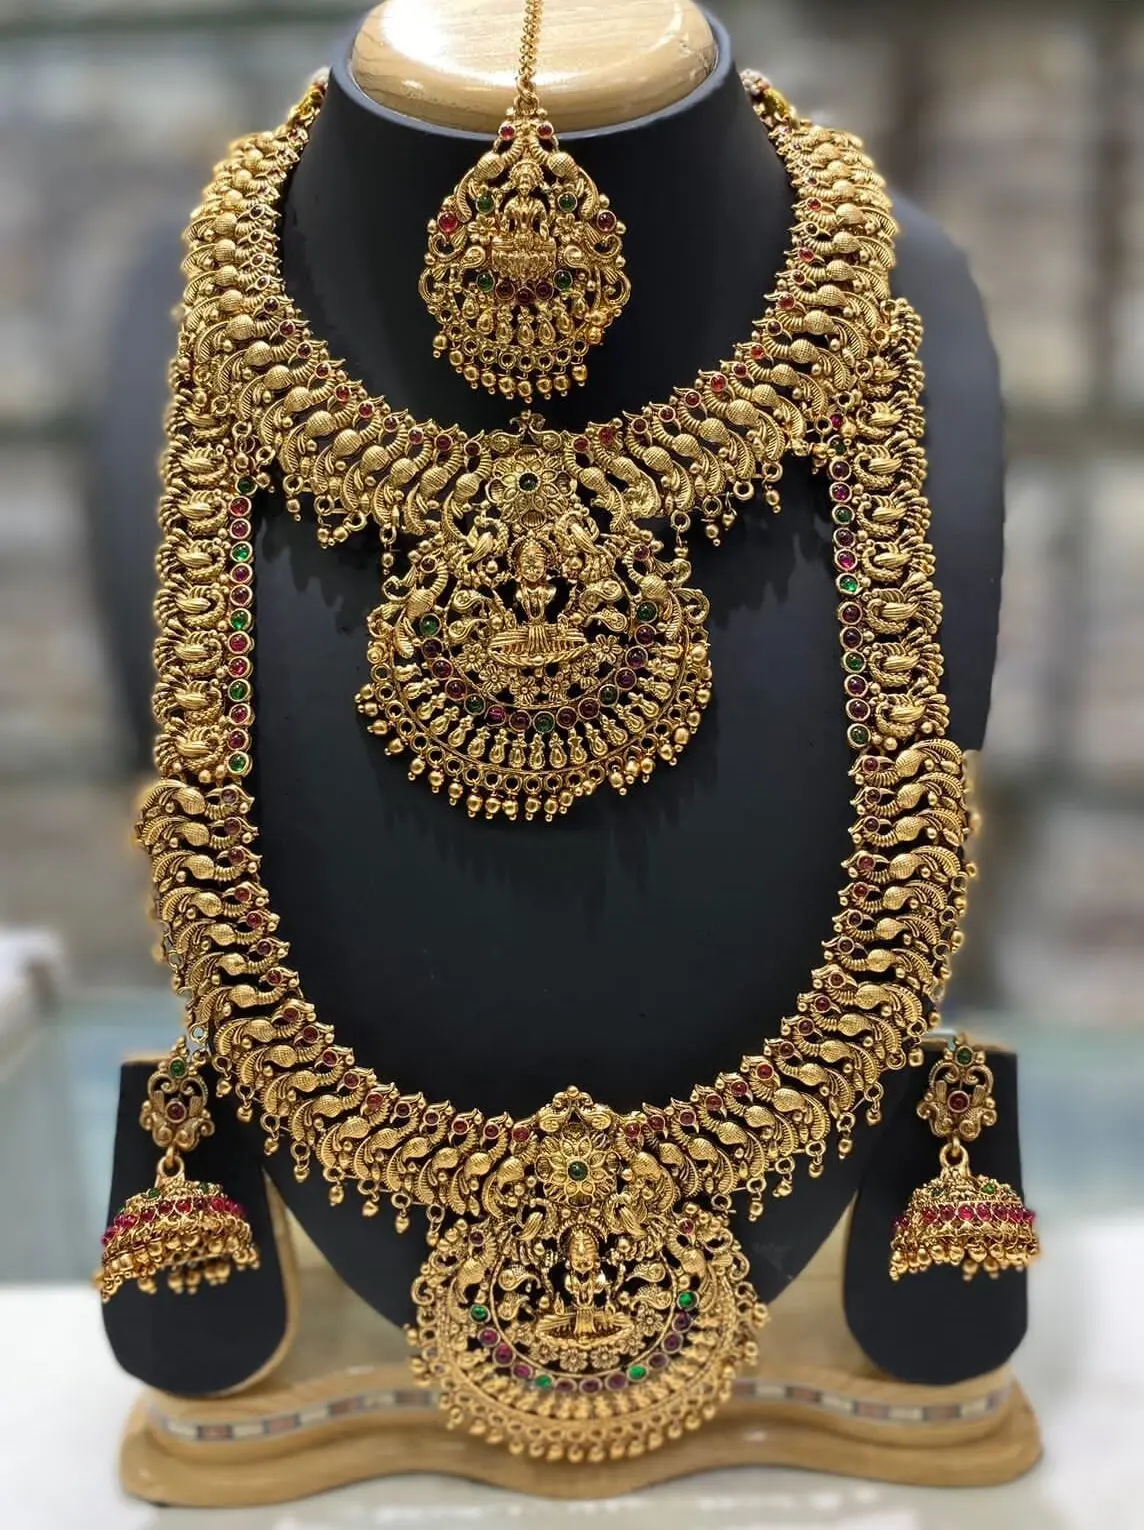 Temple Jewellery Divine Adornment Steeped in Tradition (1) temple jewellery - Temple Jewellery Divine Adornment Steeped in Tradition 1 - Temple Jewellery: Divine Adornment Steeped in Tradition